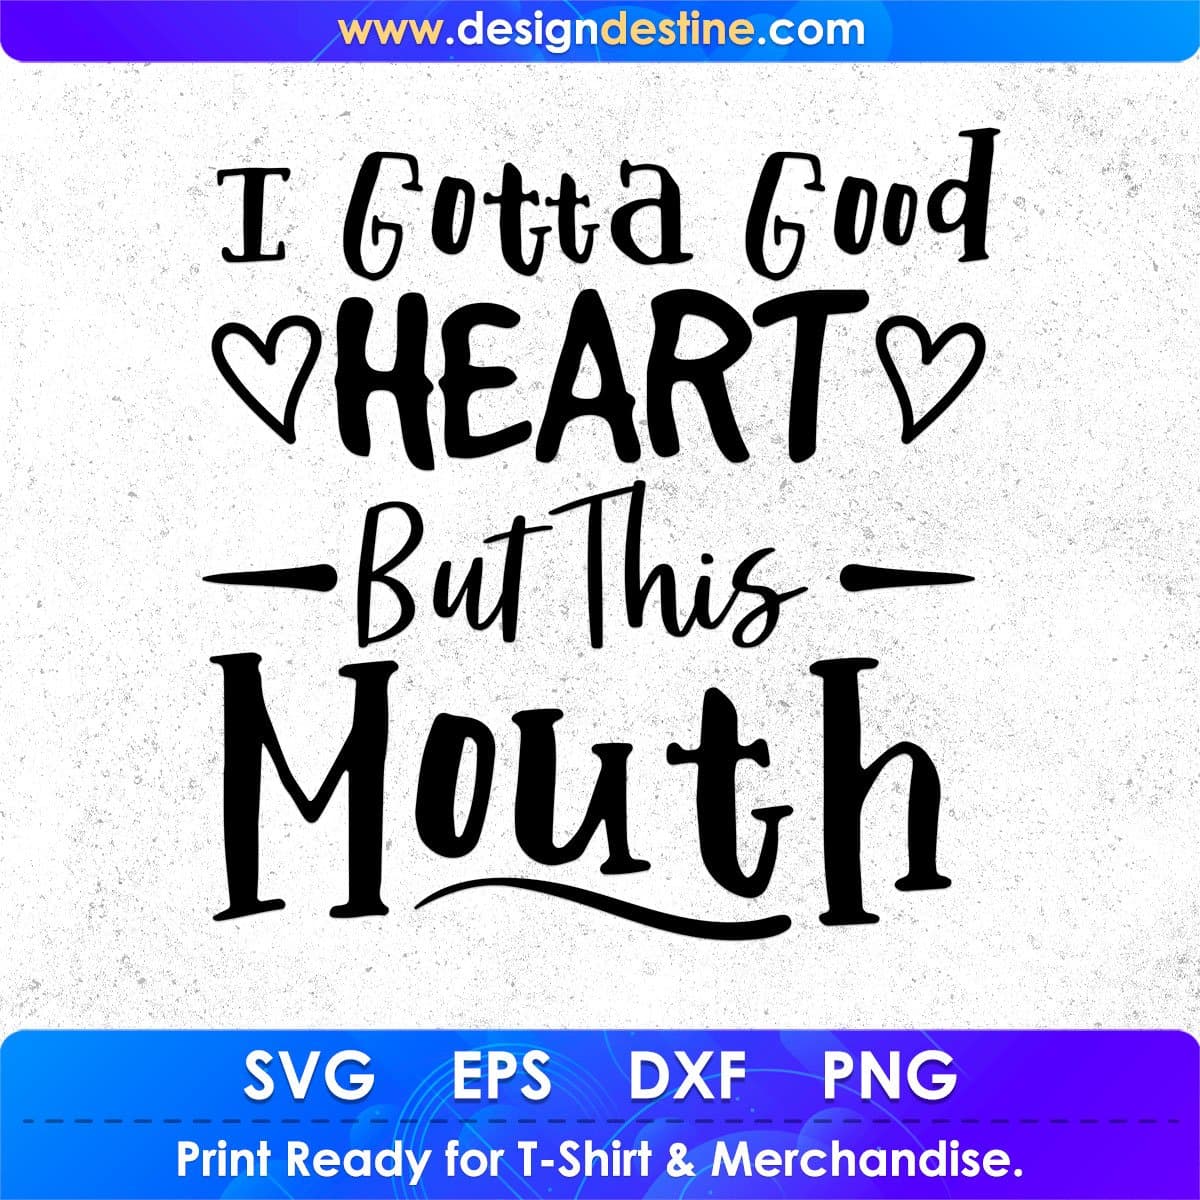 I Gotta Good Heart But This Mouth Quotes T shirt Design In Png Svg Cutting Printable Files